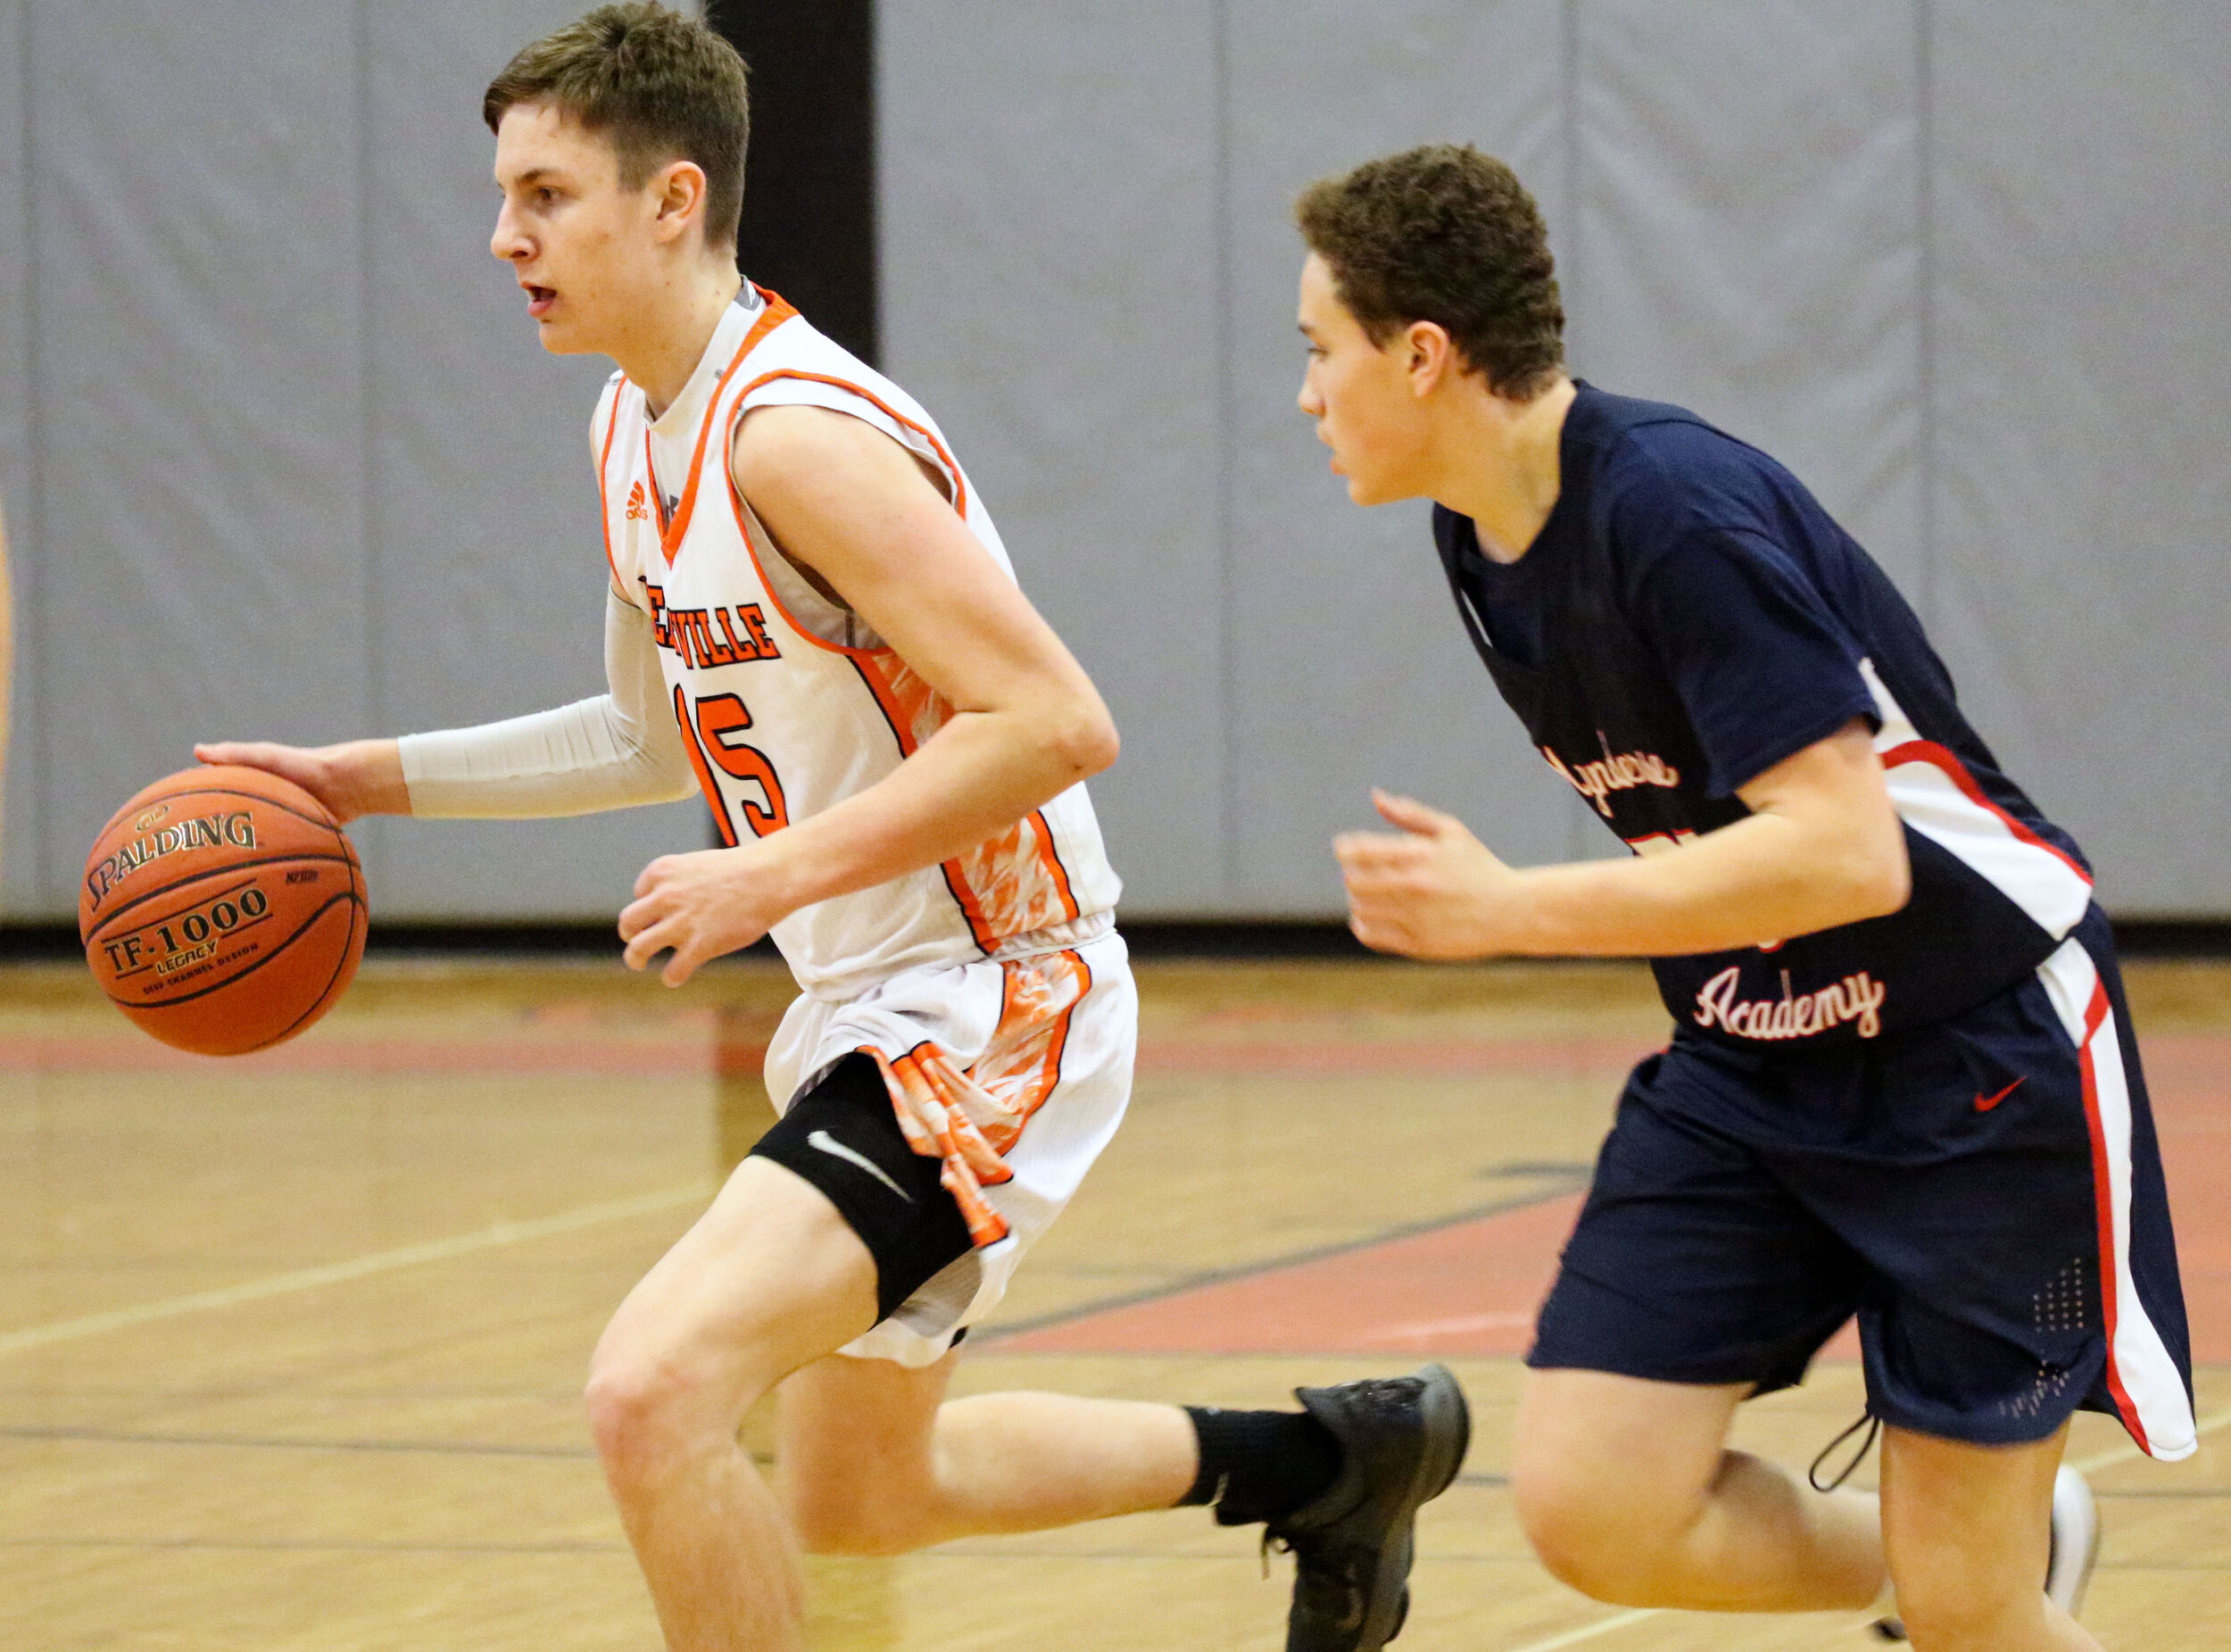  Wellsville’s Alex Perkins (15) pushes his pace around to the outside against the Mynderse defense during Saturday afternoon’s Class B2 Quarterfinal matchup in Wellsville. [Chris Brooks/WellsvilleSports.com] 